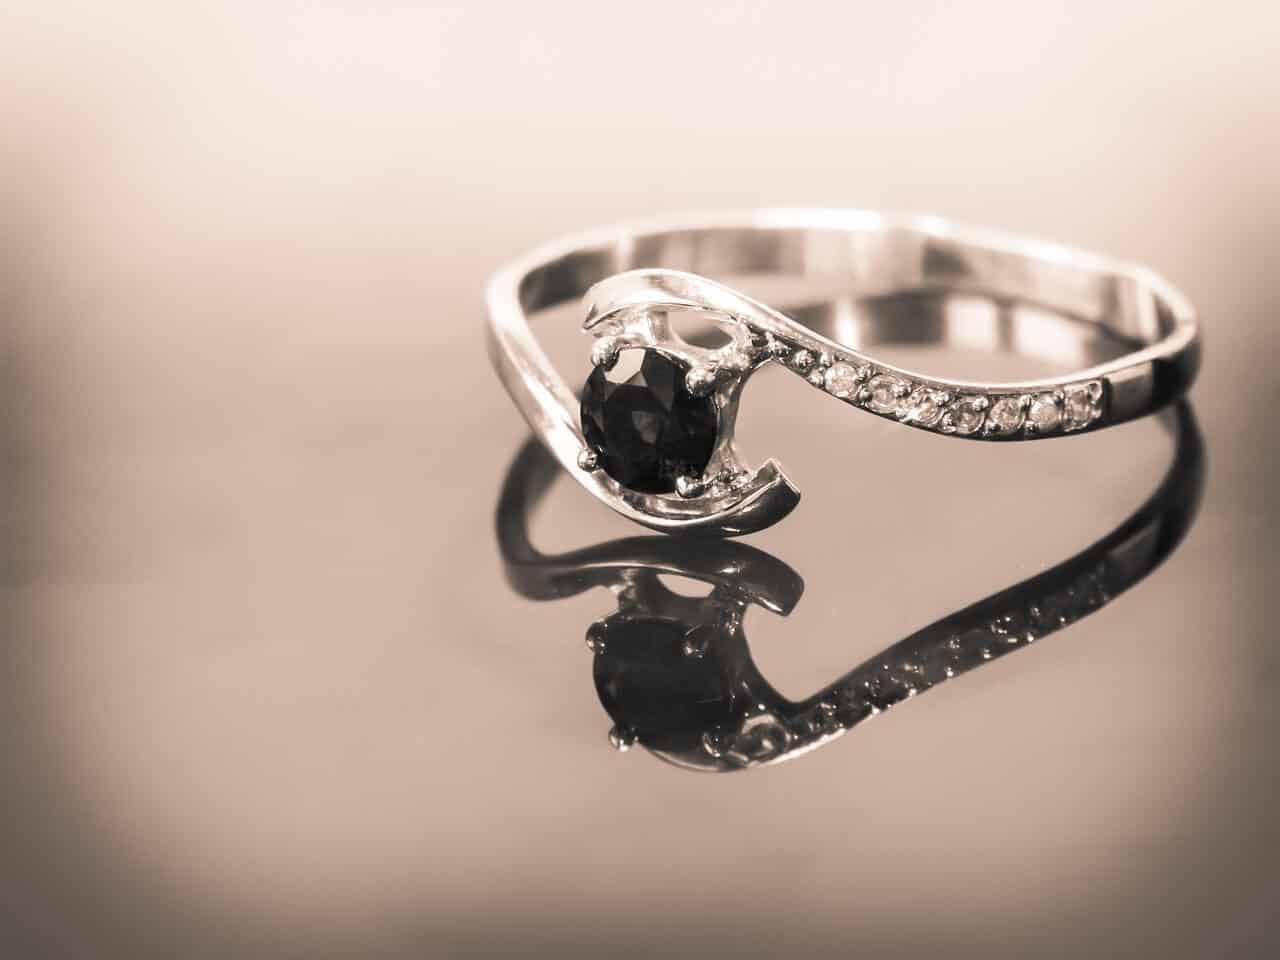 Details about   8 Ct AAA Black Diamond Solitaire Ring with Blue Sapphires.Certified.Earth mined.